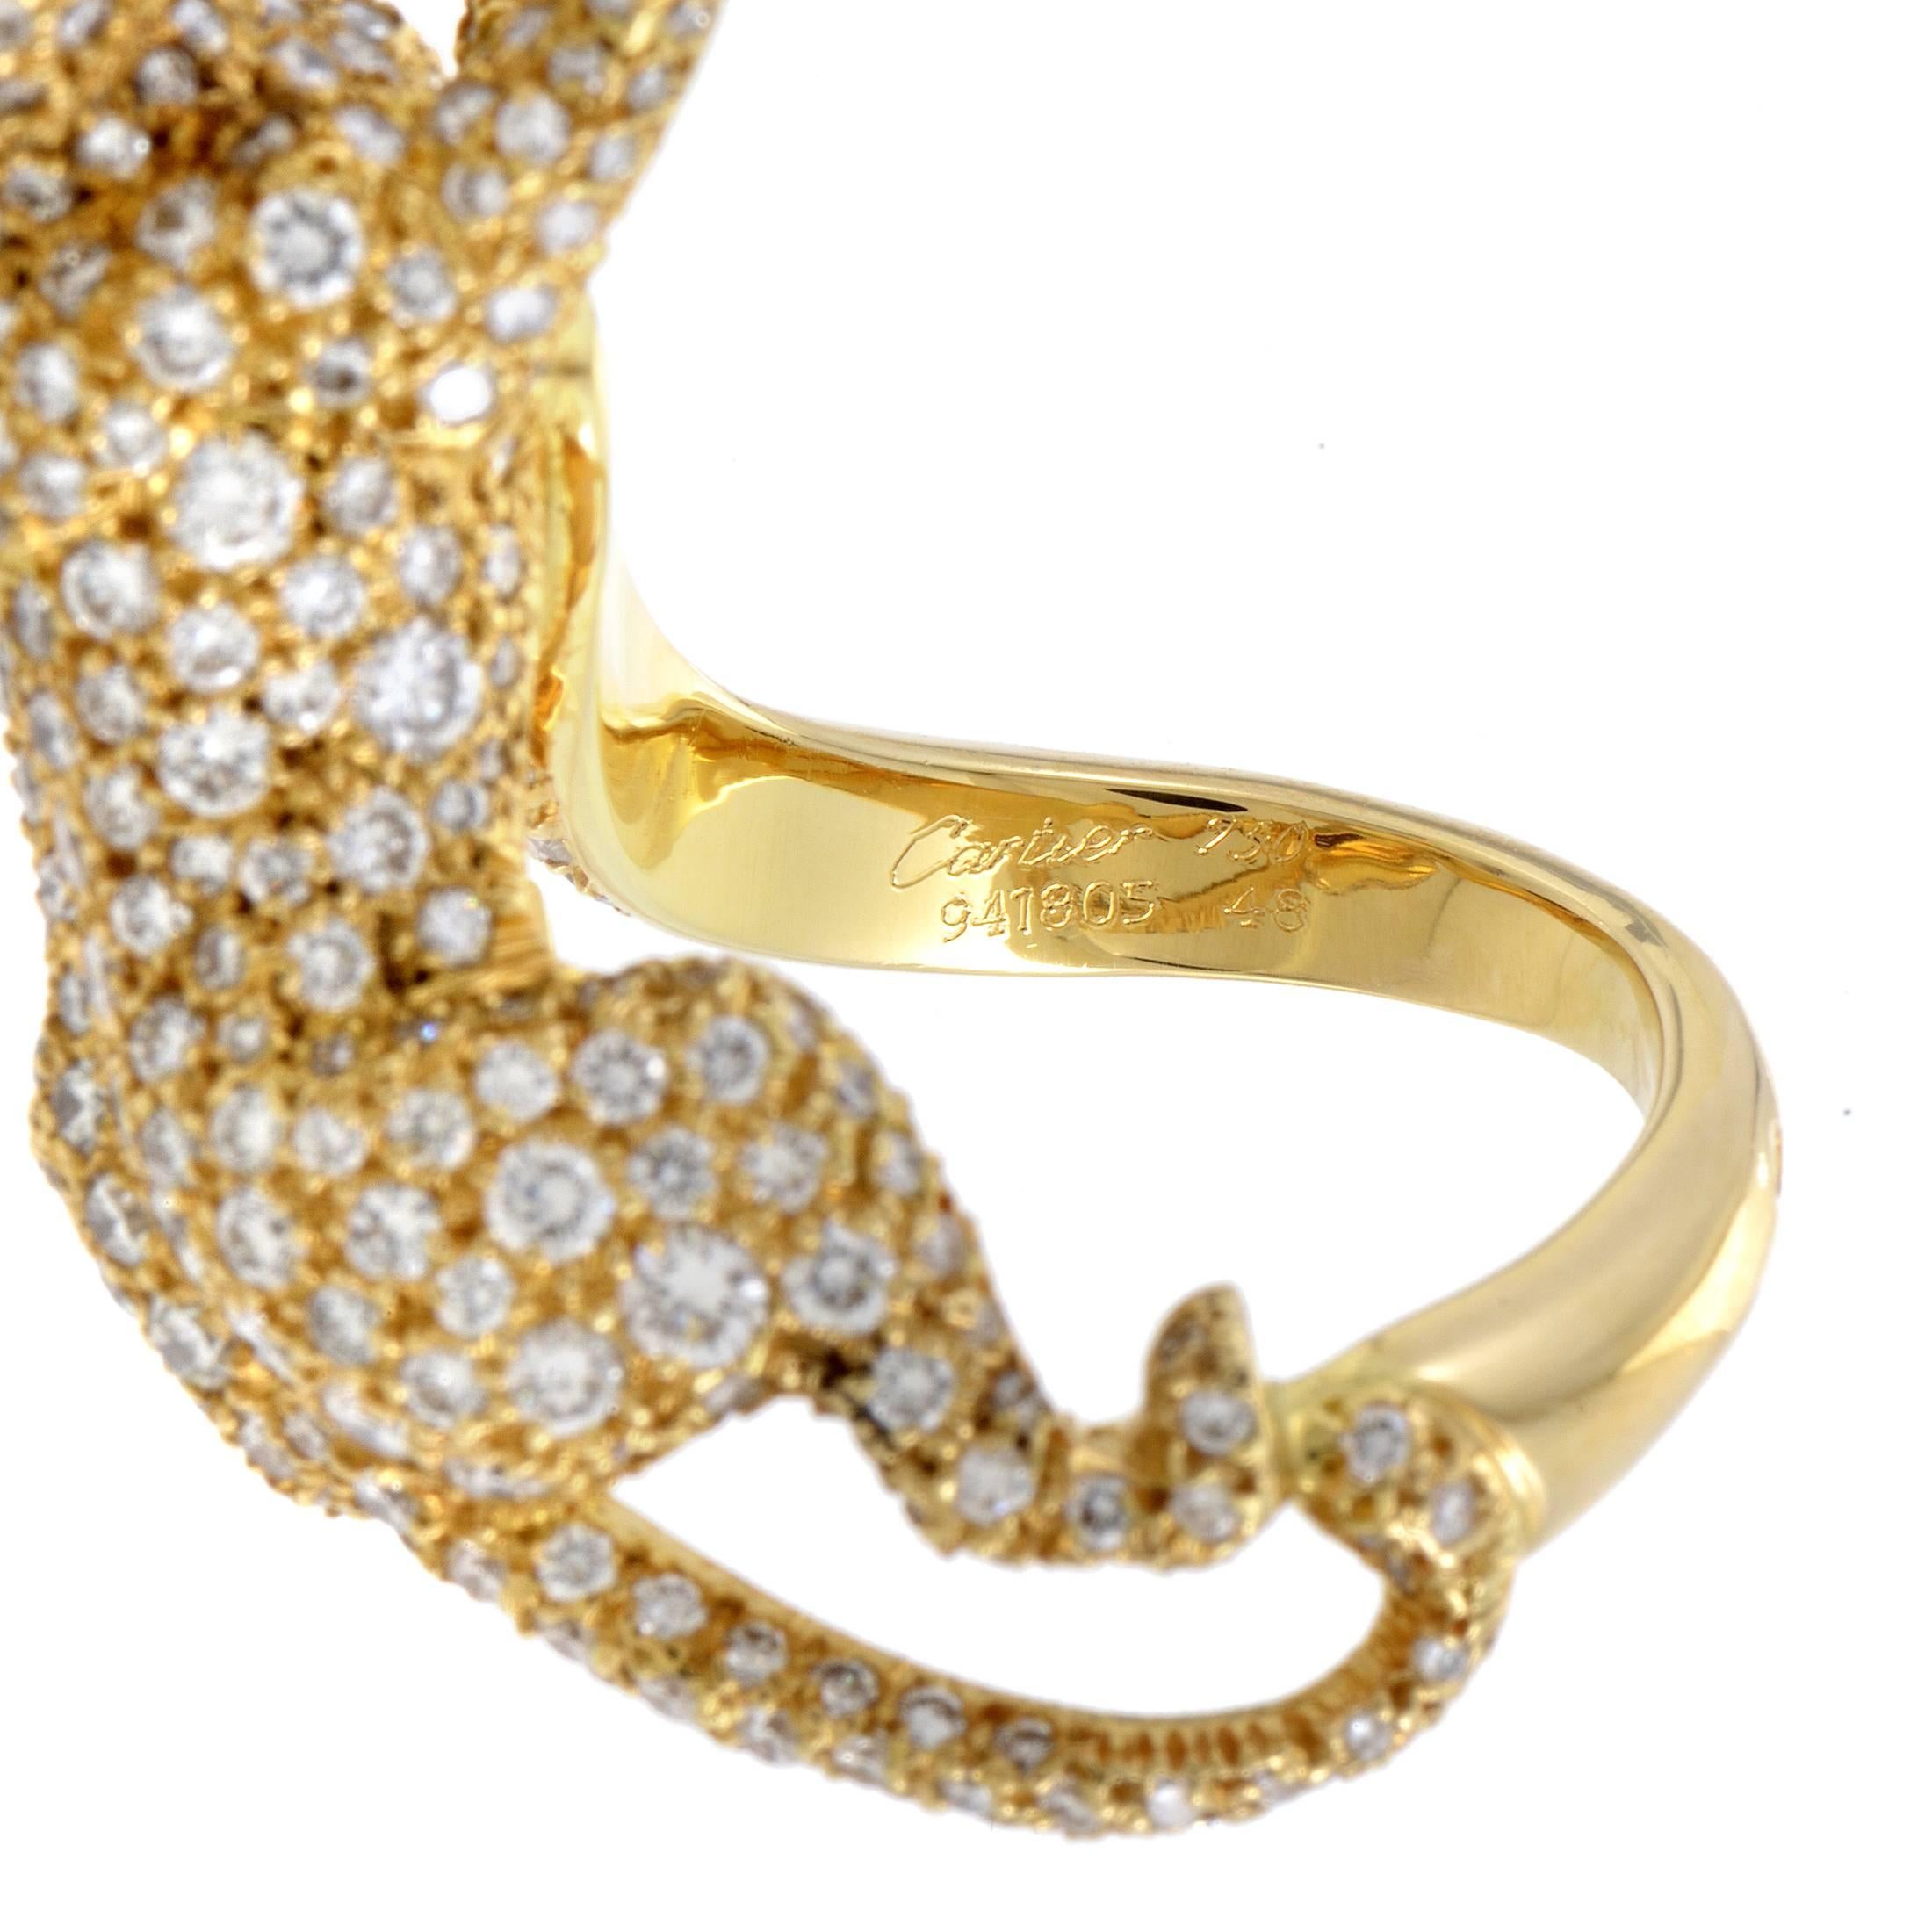 Cartier Panthere Yellow Gold Full Diamond Pave Ring 1